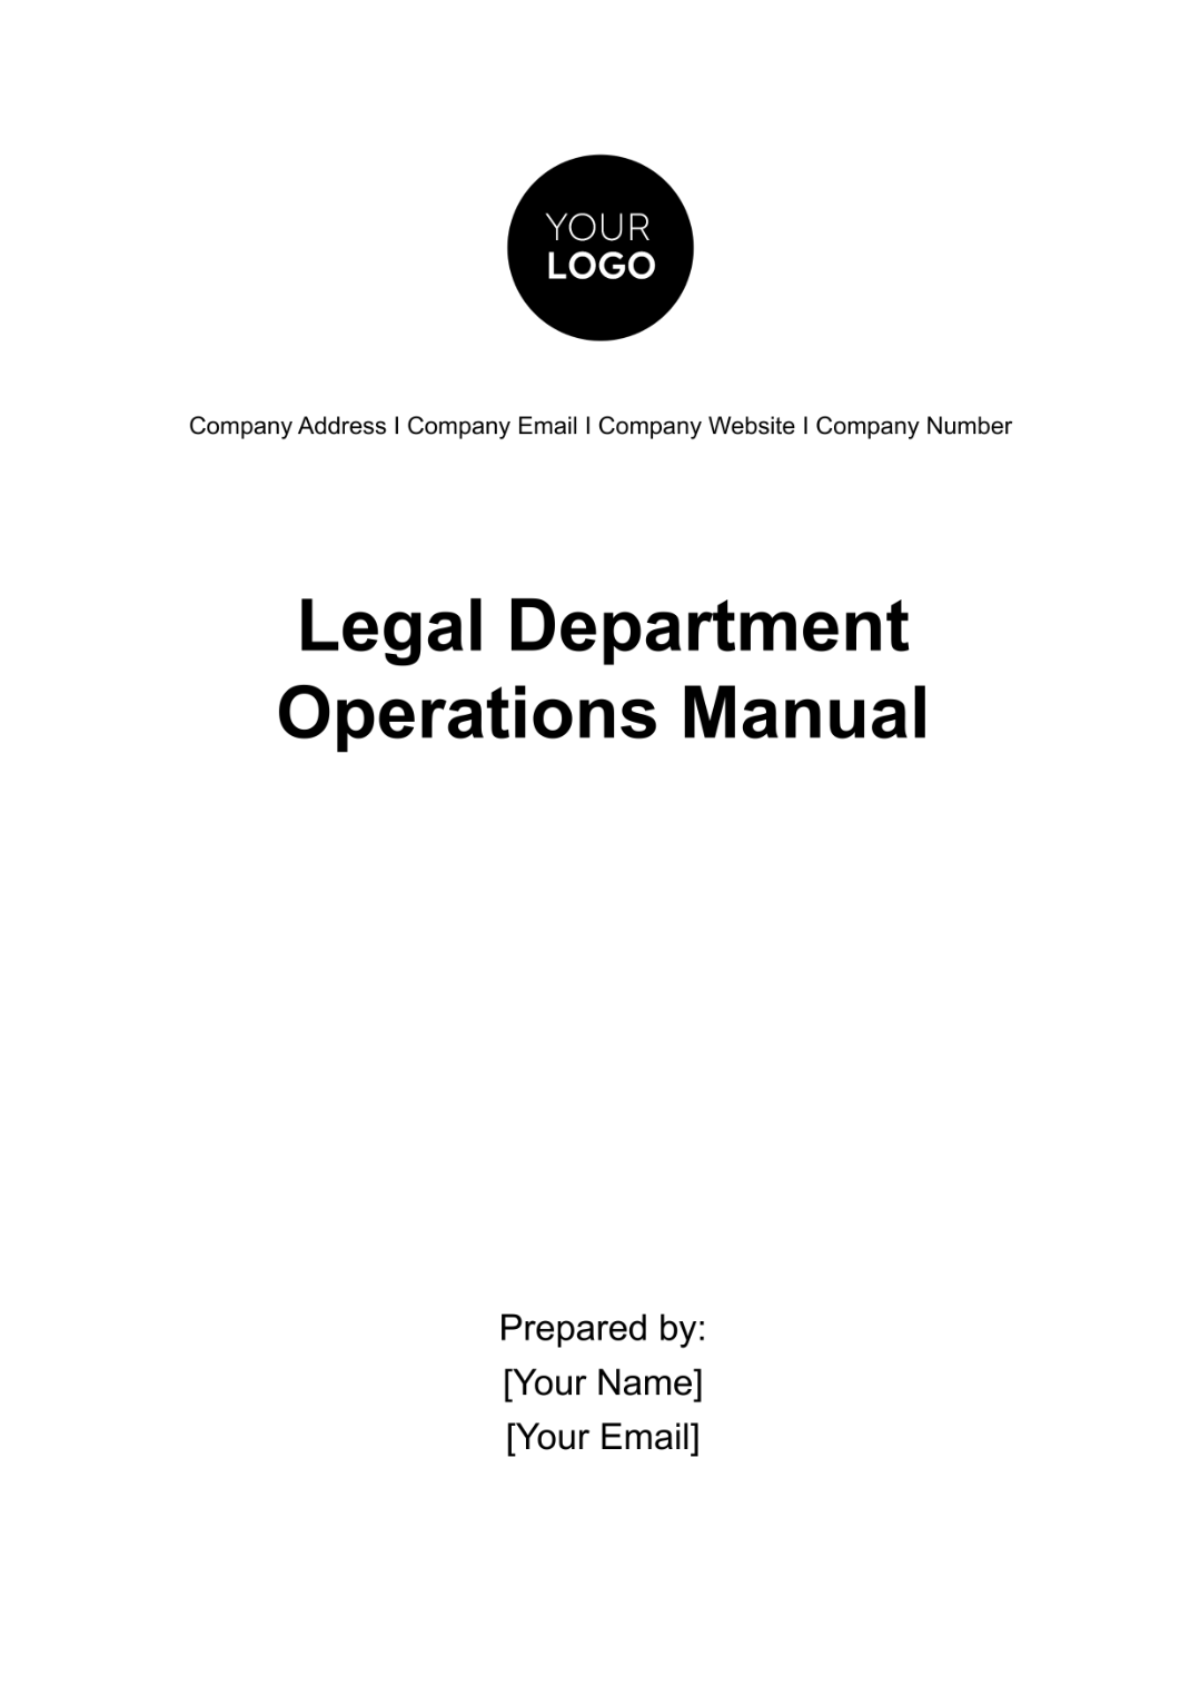 Free Legal Department Operations Manual Template